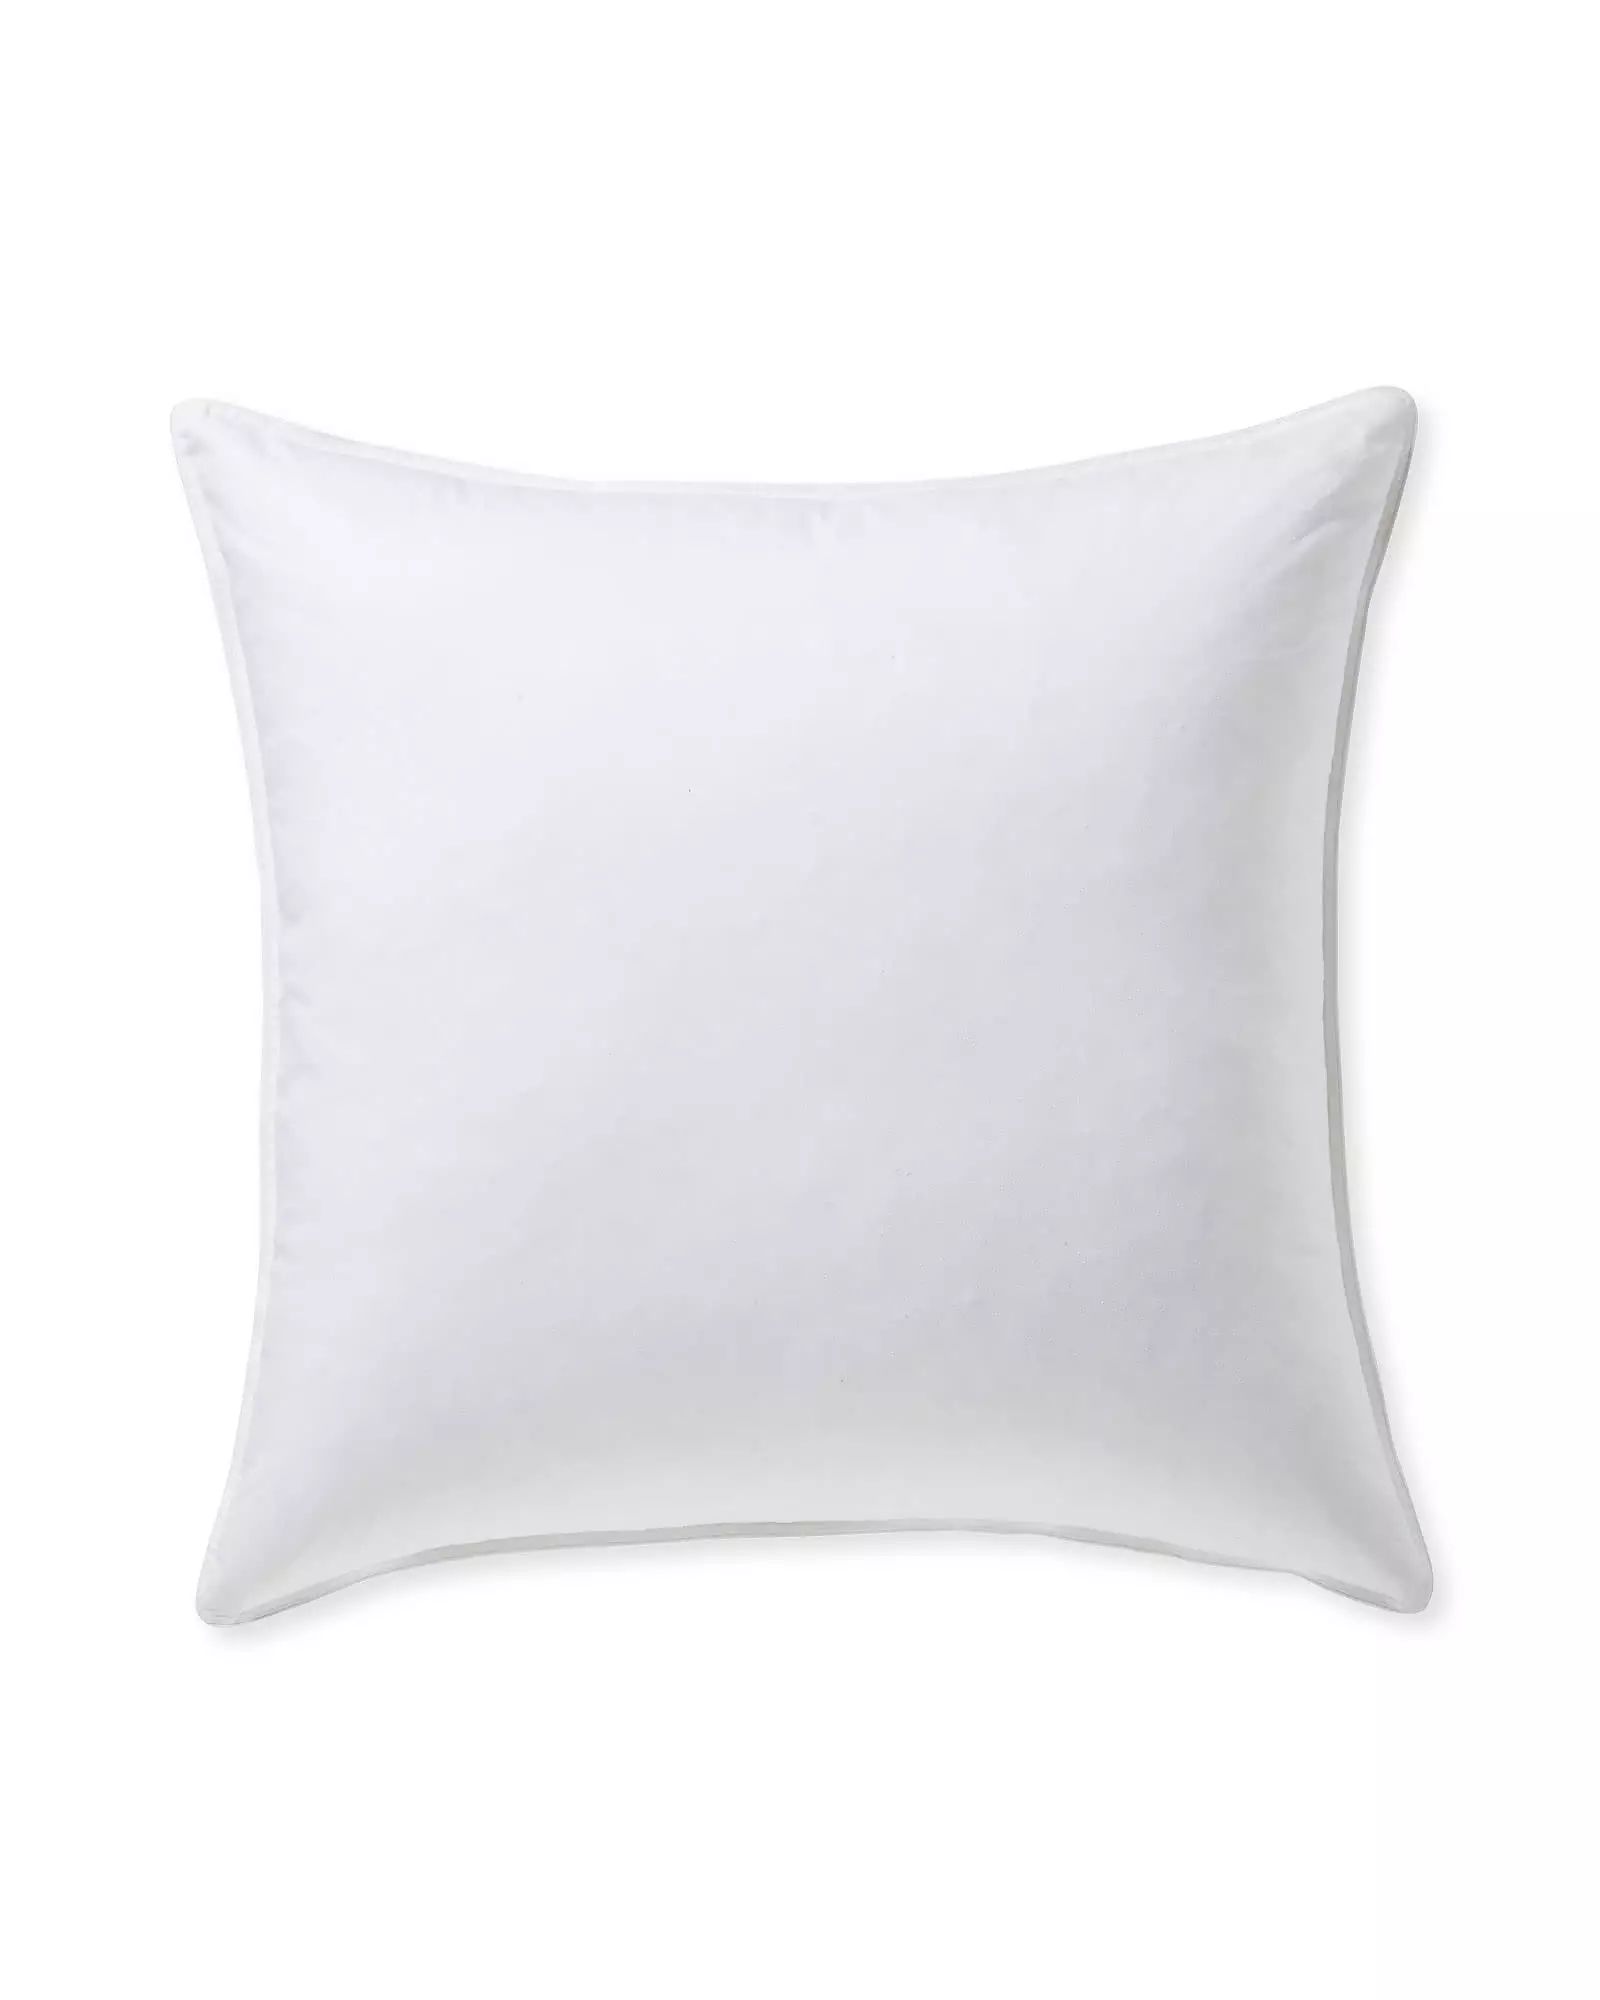 Indoor Pillow Inserts | Serena and Lily